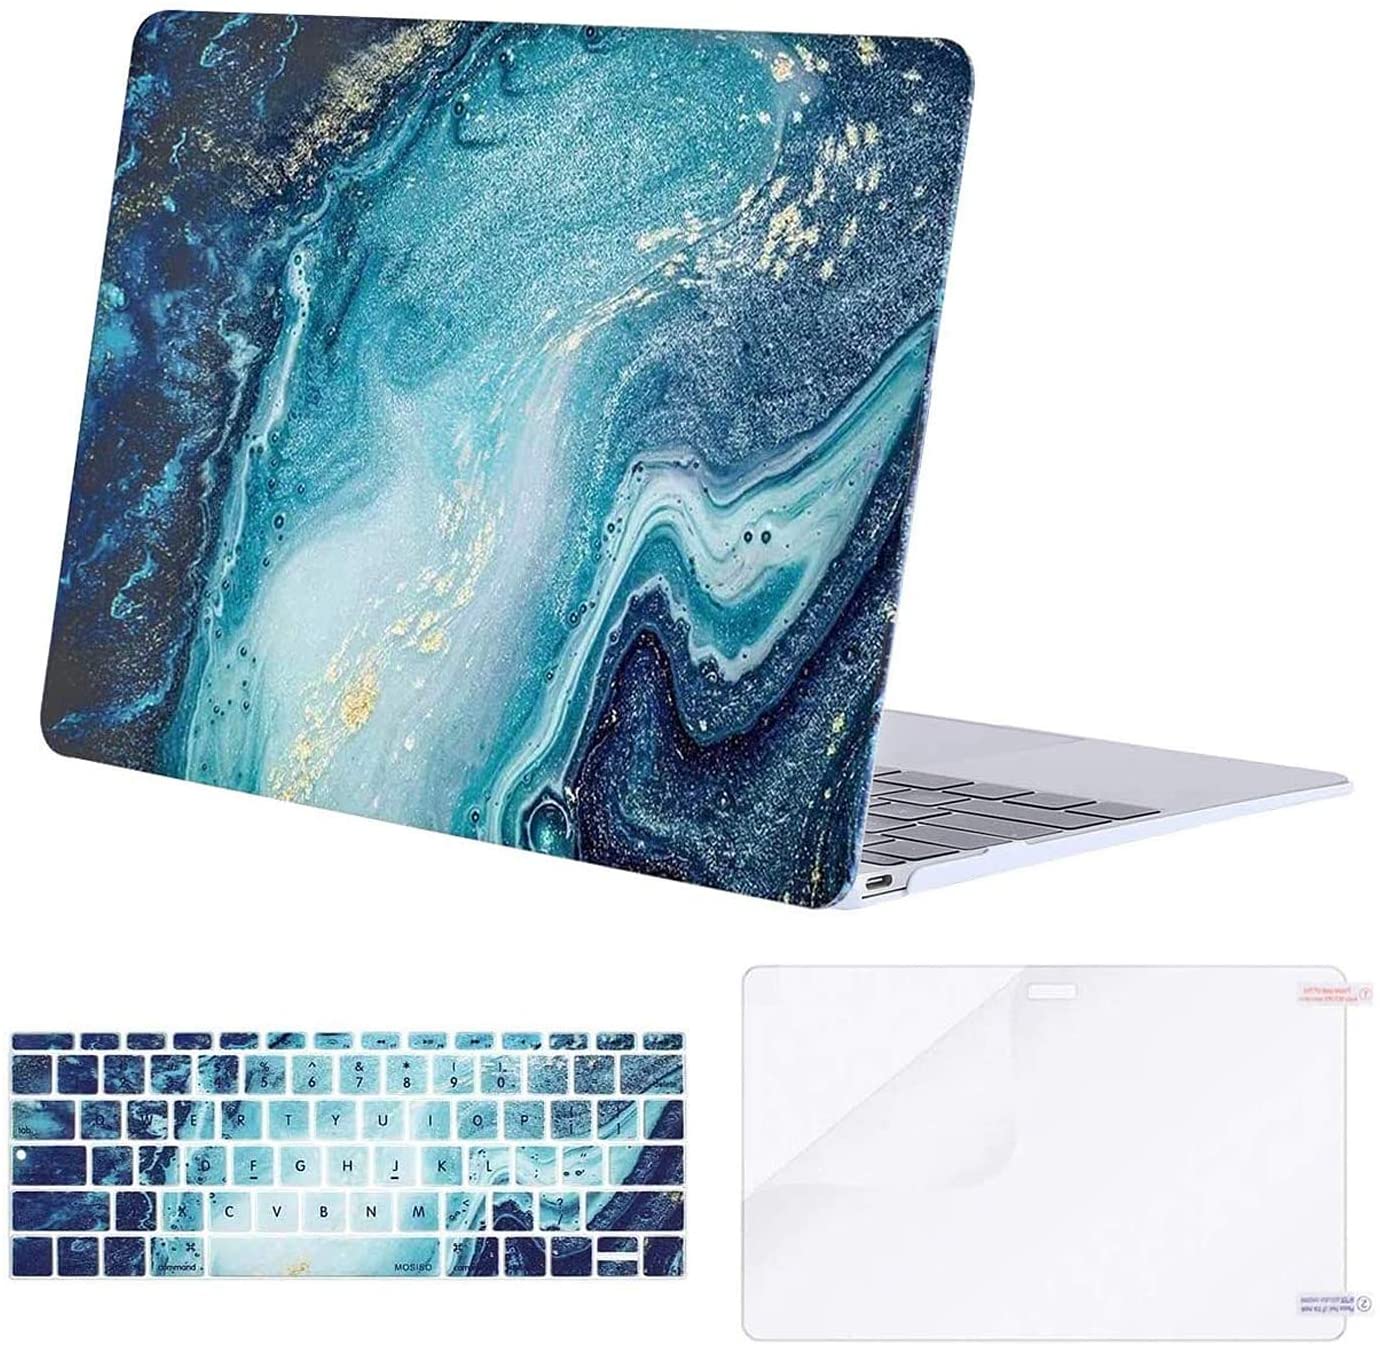 Creative Wave Marble - MacBook Air 13 inch Case 2009 - 2017 Release. Hard case only - e4cents